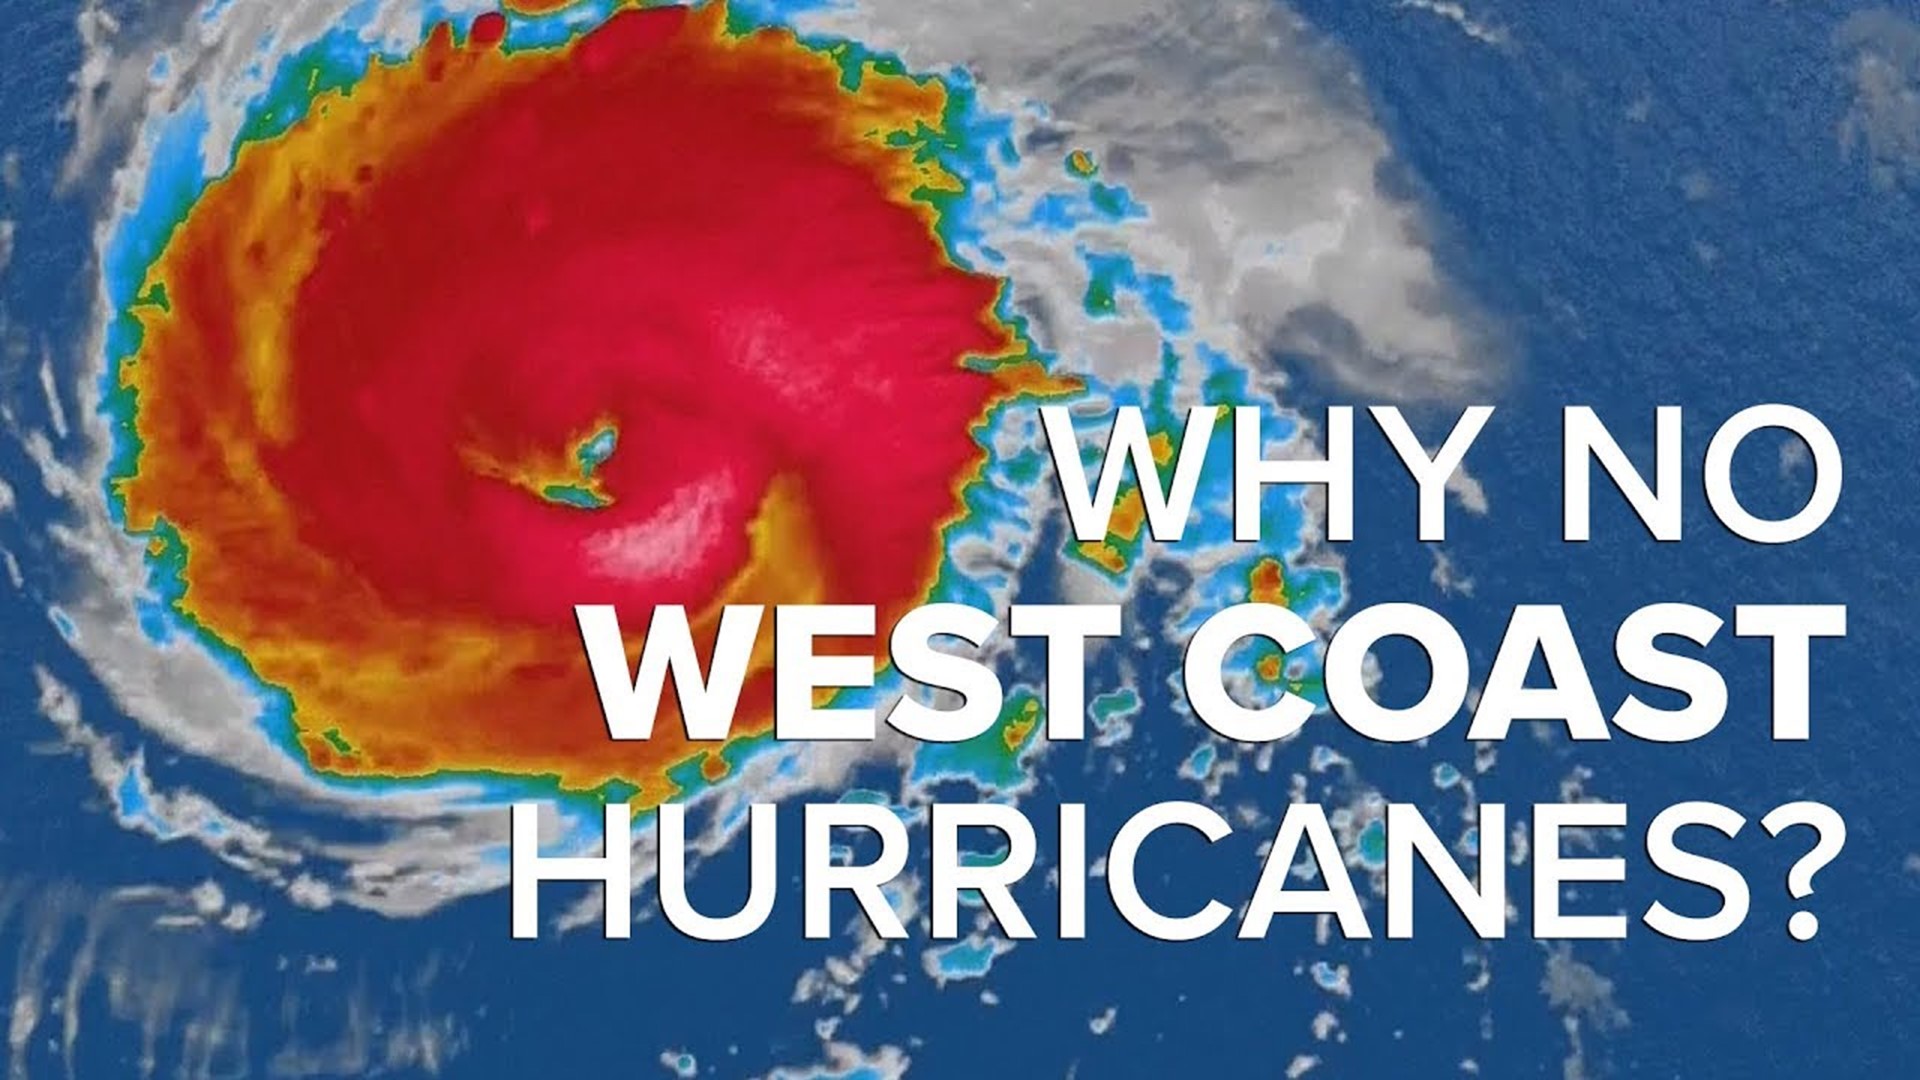 The U.S. West Coast has cold ocean waters not supportive for hurricanes and the wind carries hurricanes away from the West Coast.